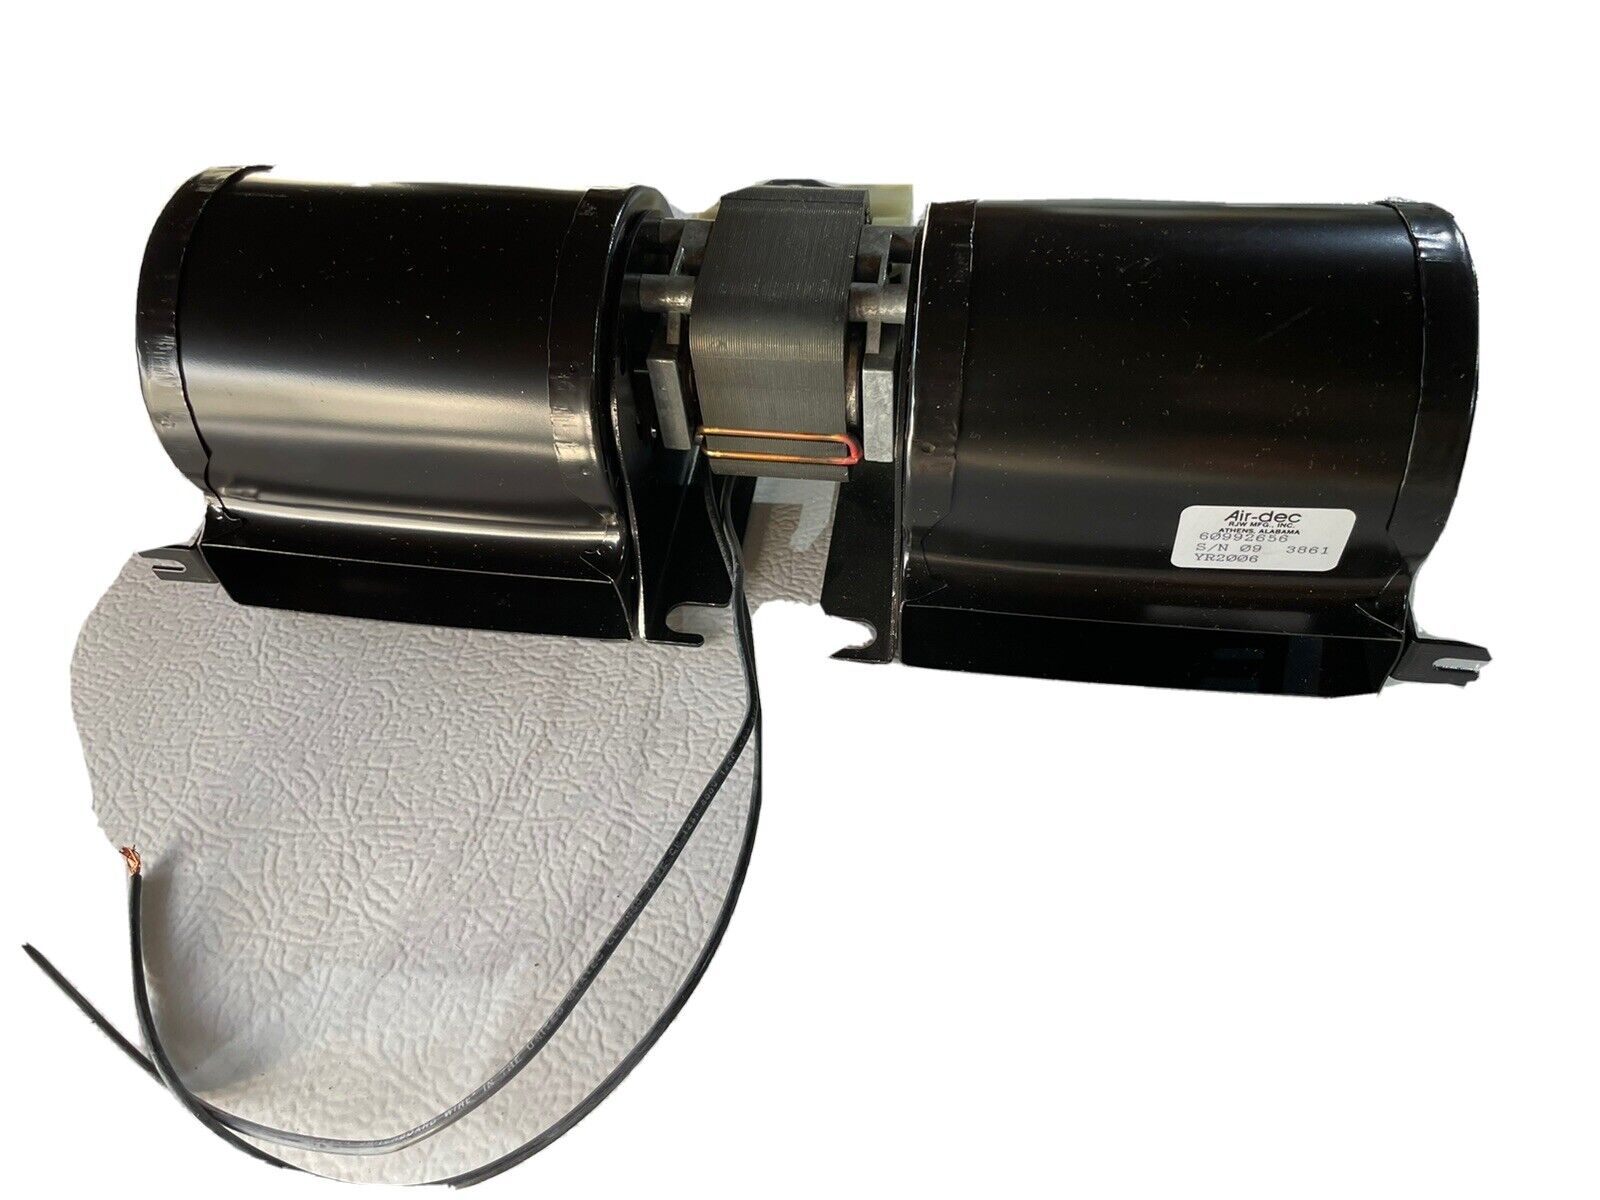 Fireplace Blower Fan Kit For Wood, Coal, Gas And Pellet Stoves.